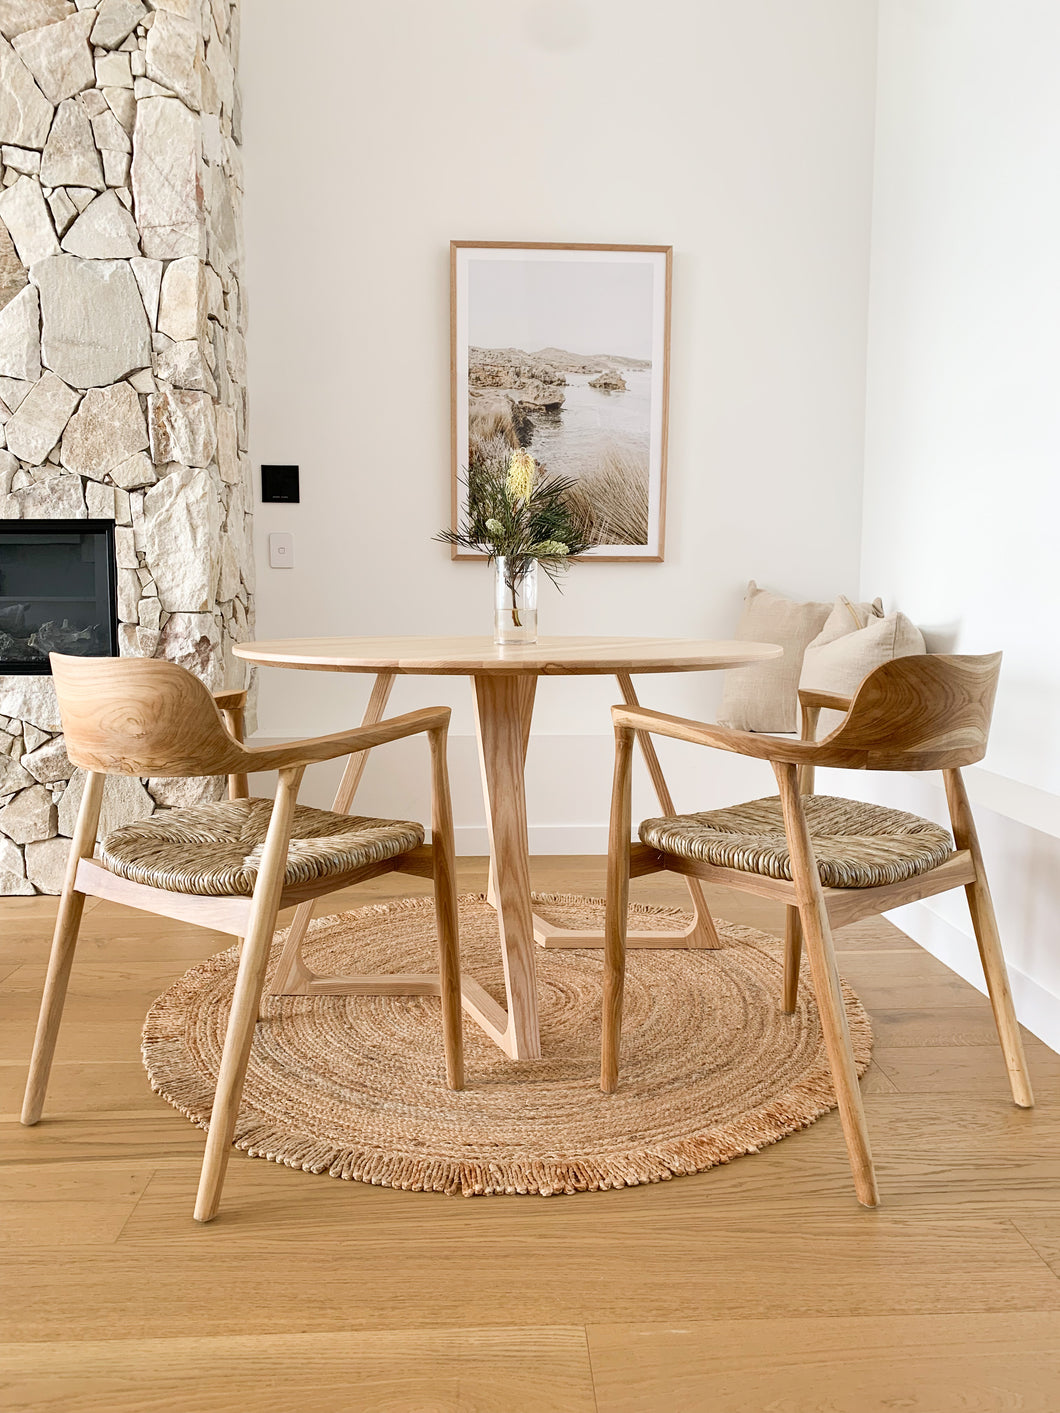 Sloane seagrass dining chair